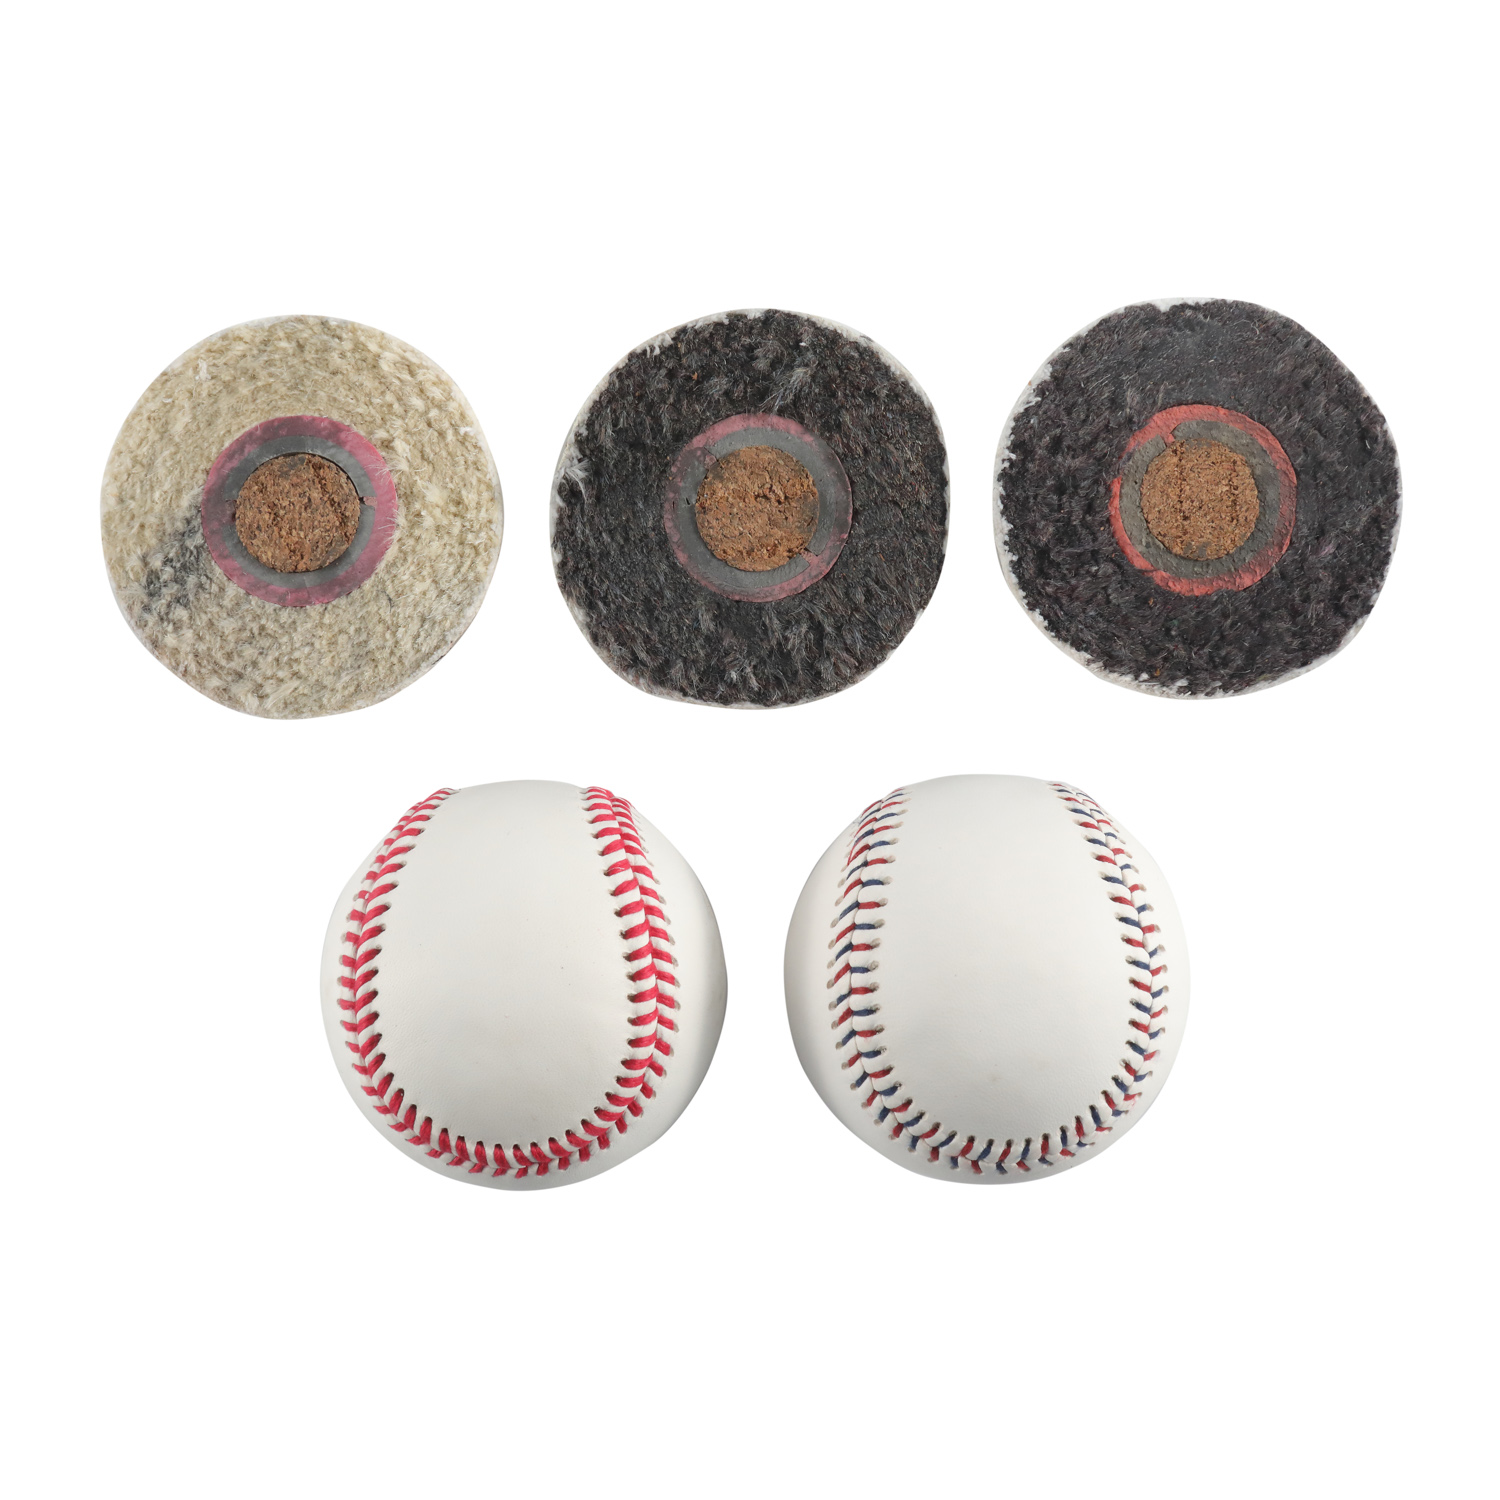 Official High Quality Professional 9 Inch Cowhide Leather Baseball